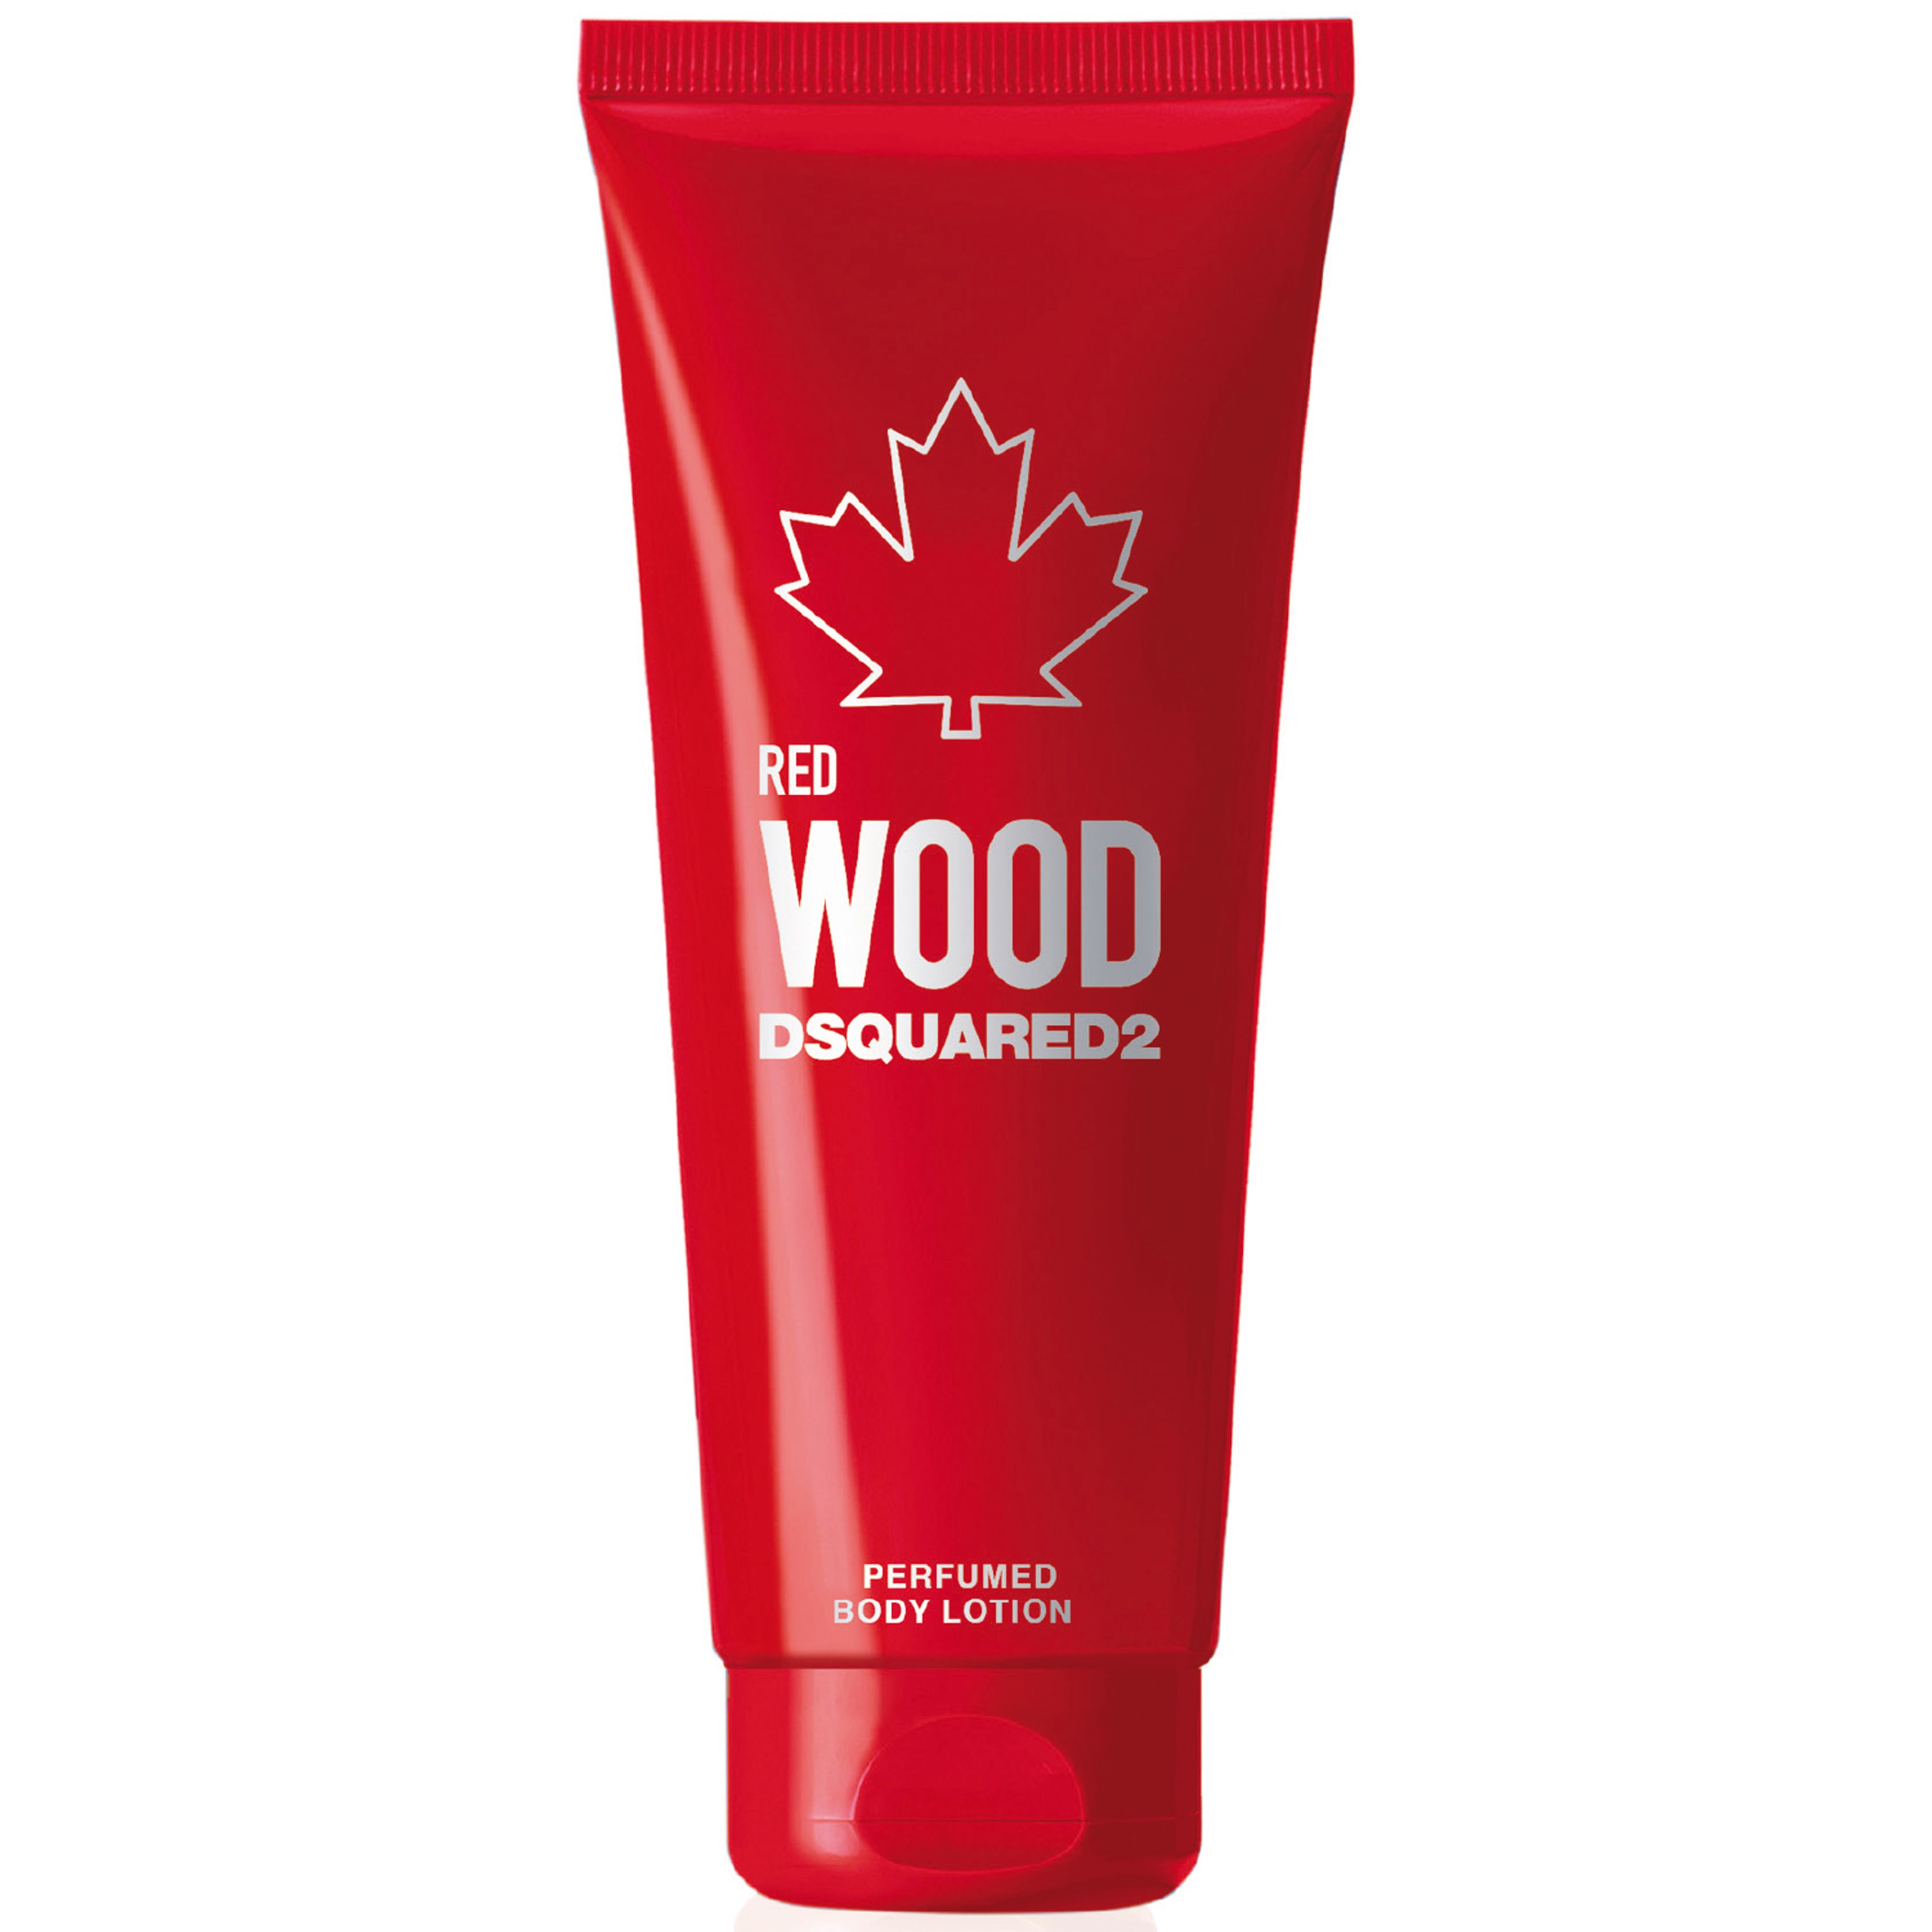 Red Wood Pour Femme Perfumed Body Lotion Dsquared2 1